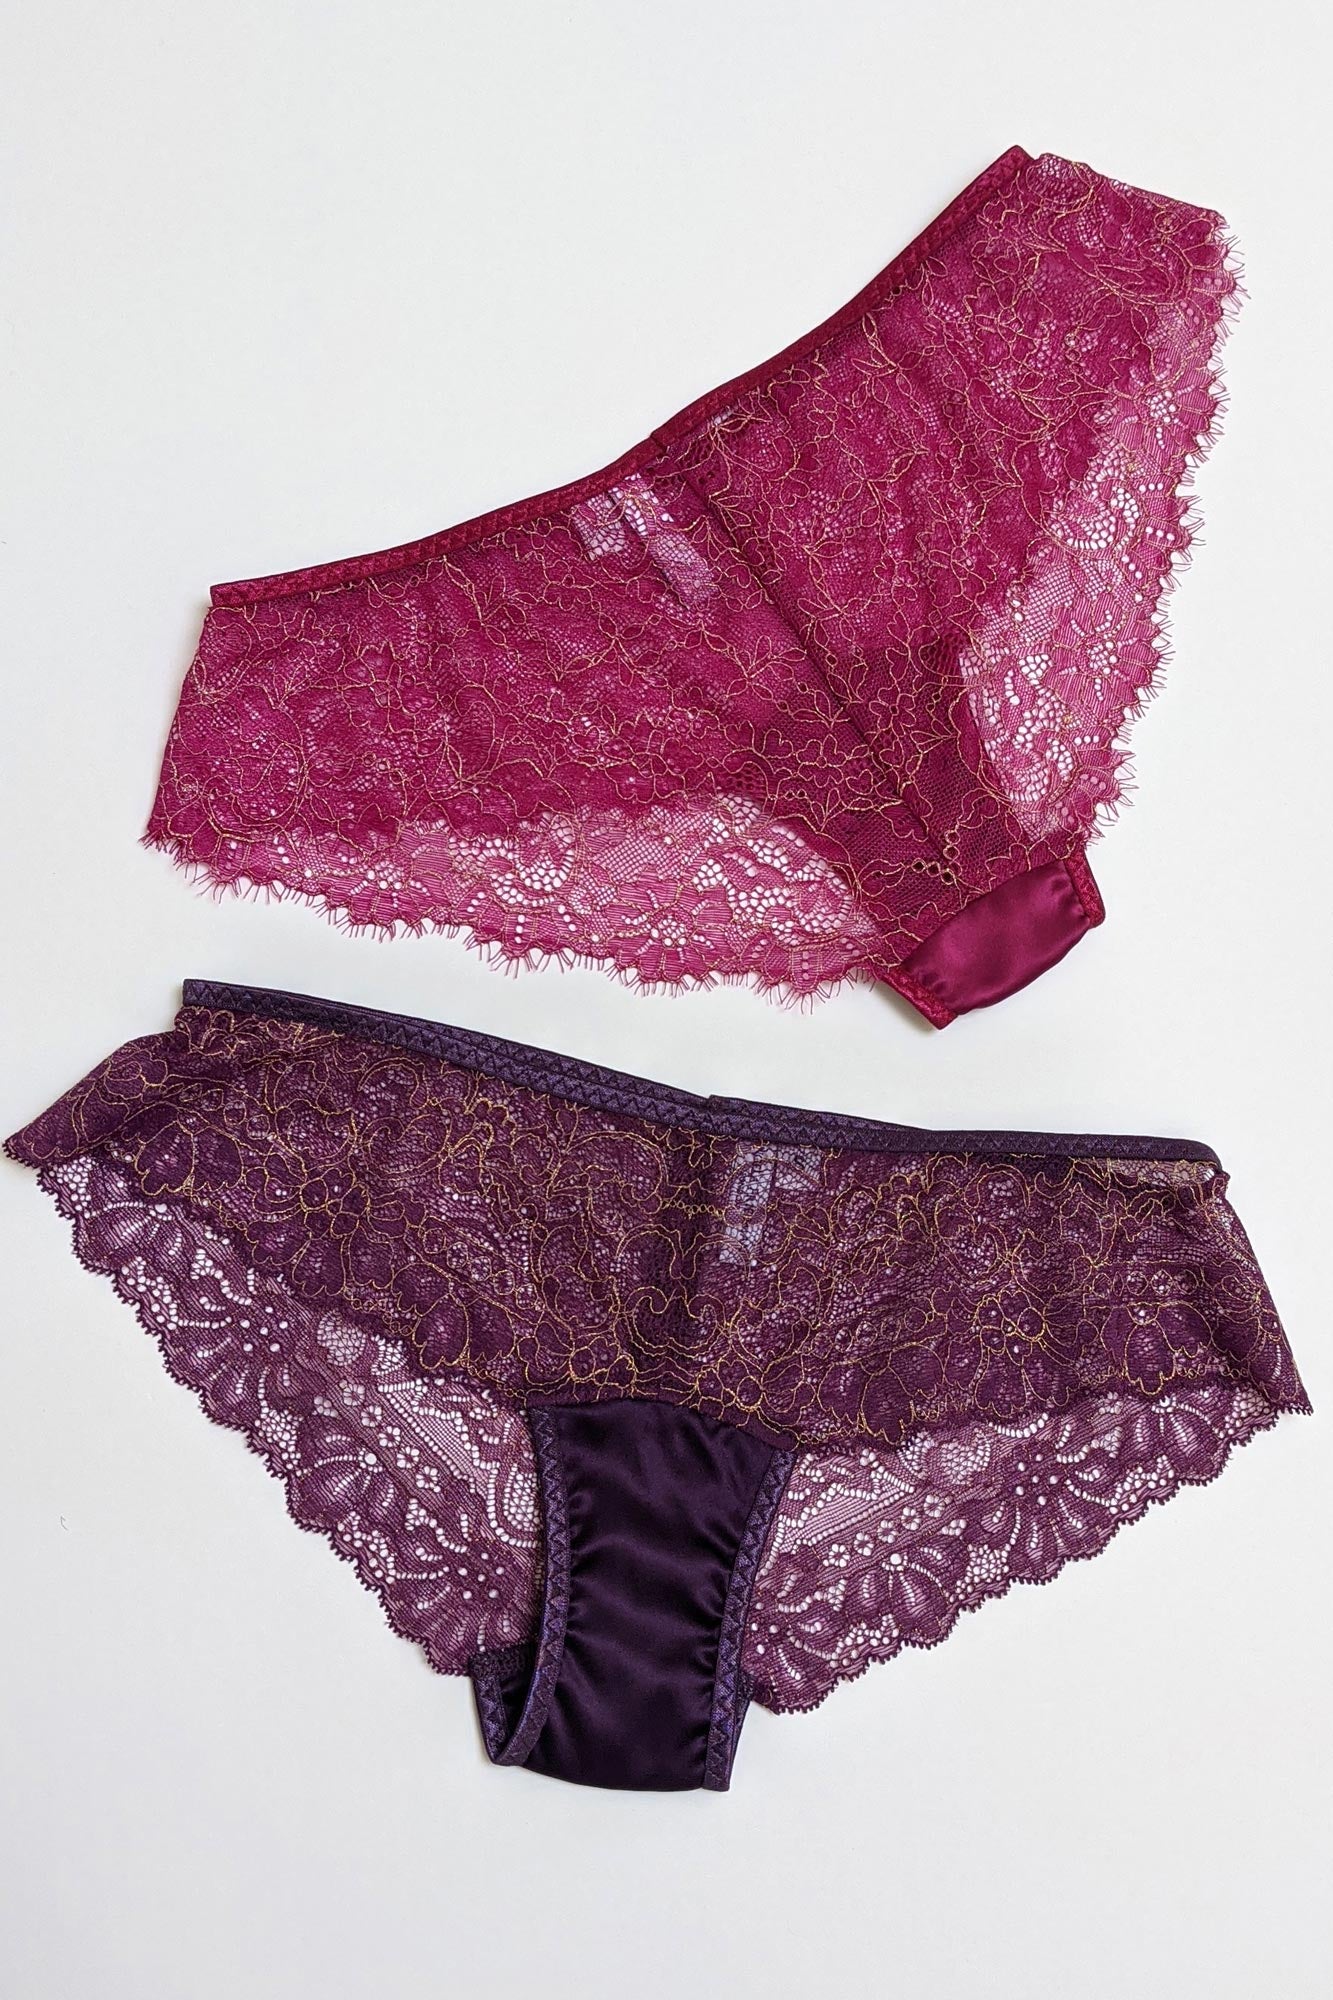 Designer pink, purple, and gold lace knickers